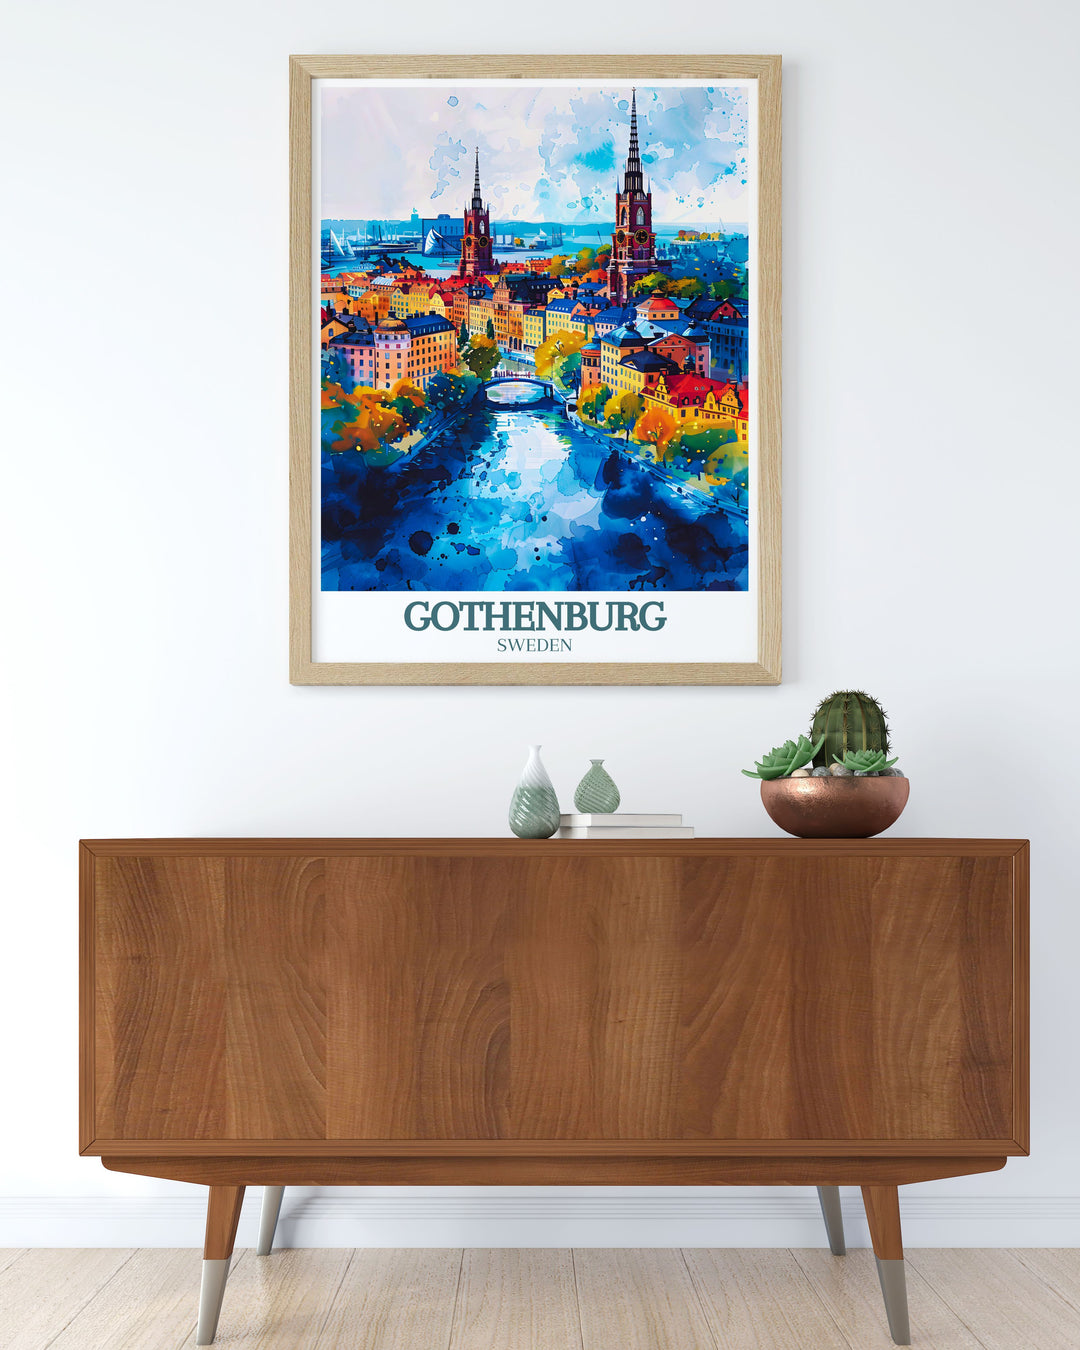 Highlighting the serene beauty of Gothenburgs canals, this travel poster features their reflective waters and picturesque surroundings. Ideal for those who appreciate peaceful urban landscapes, this artwork brings the calming charm of Gothenburgs canals into your living space.